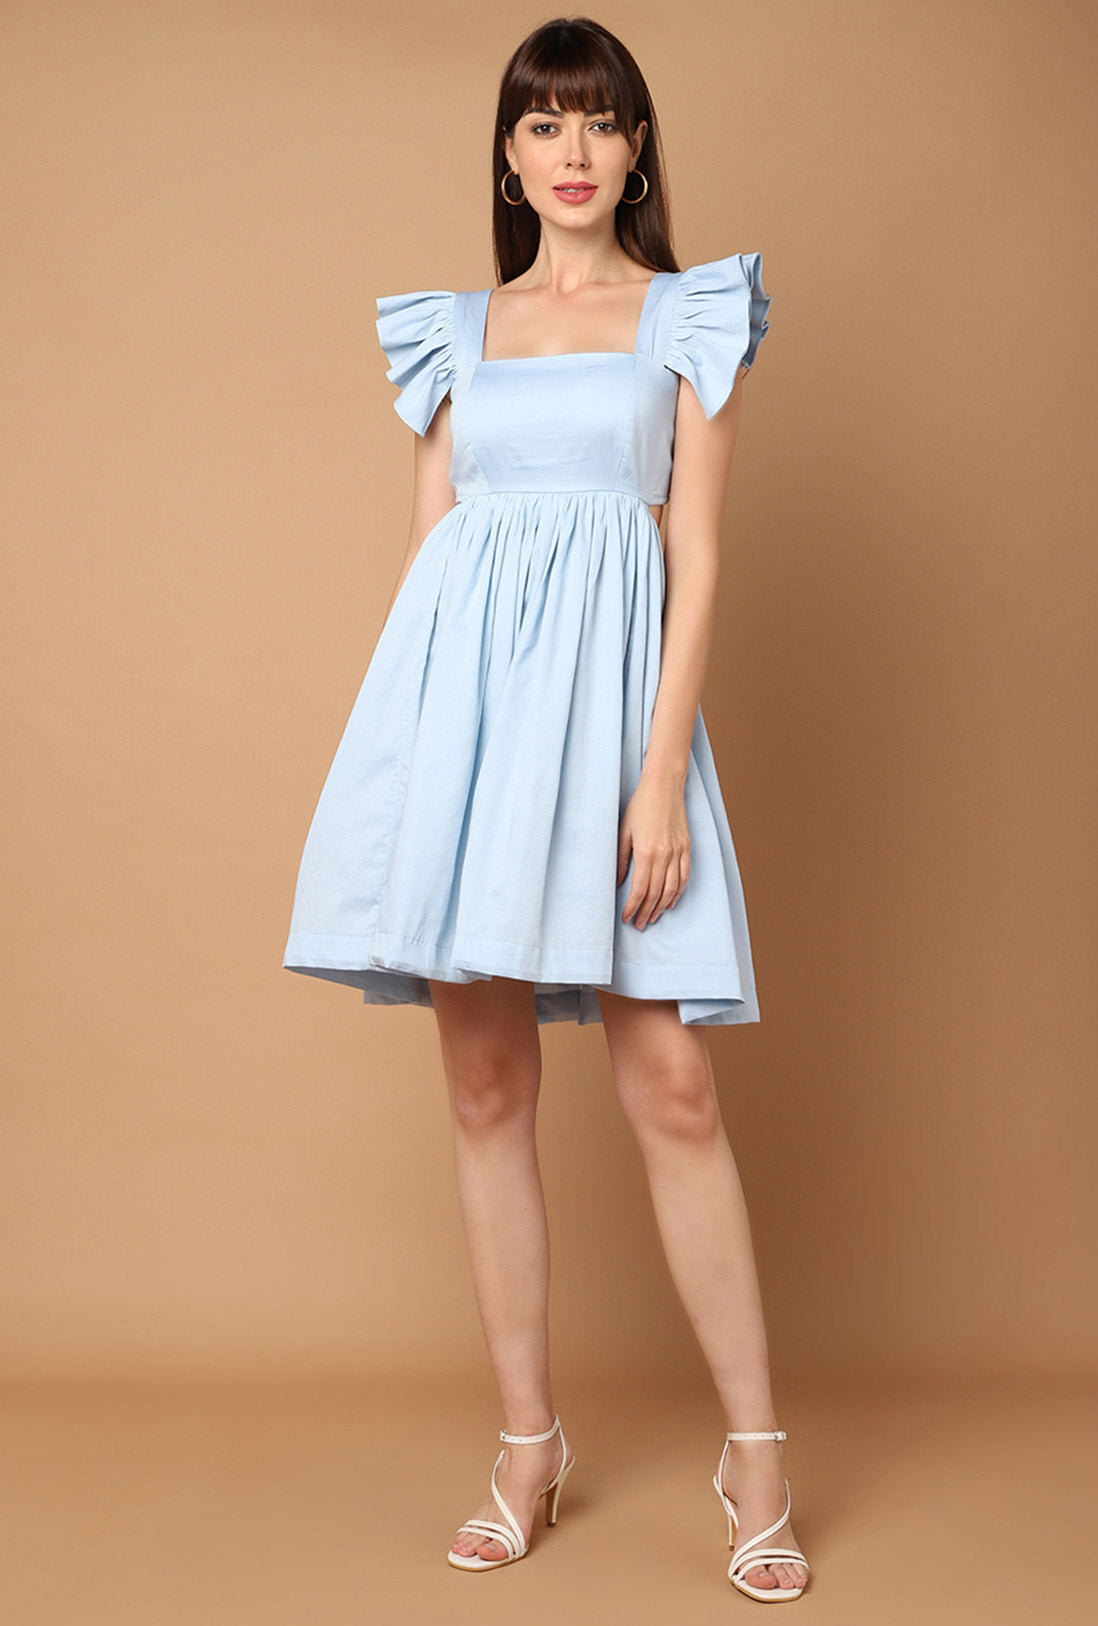 Dimmed Baby Blue Cotton Dress